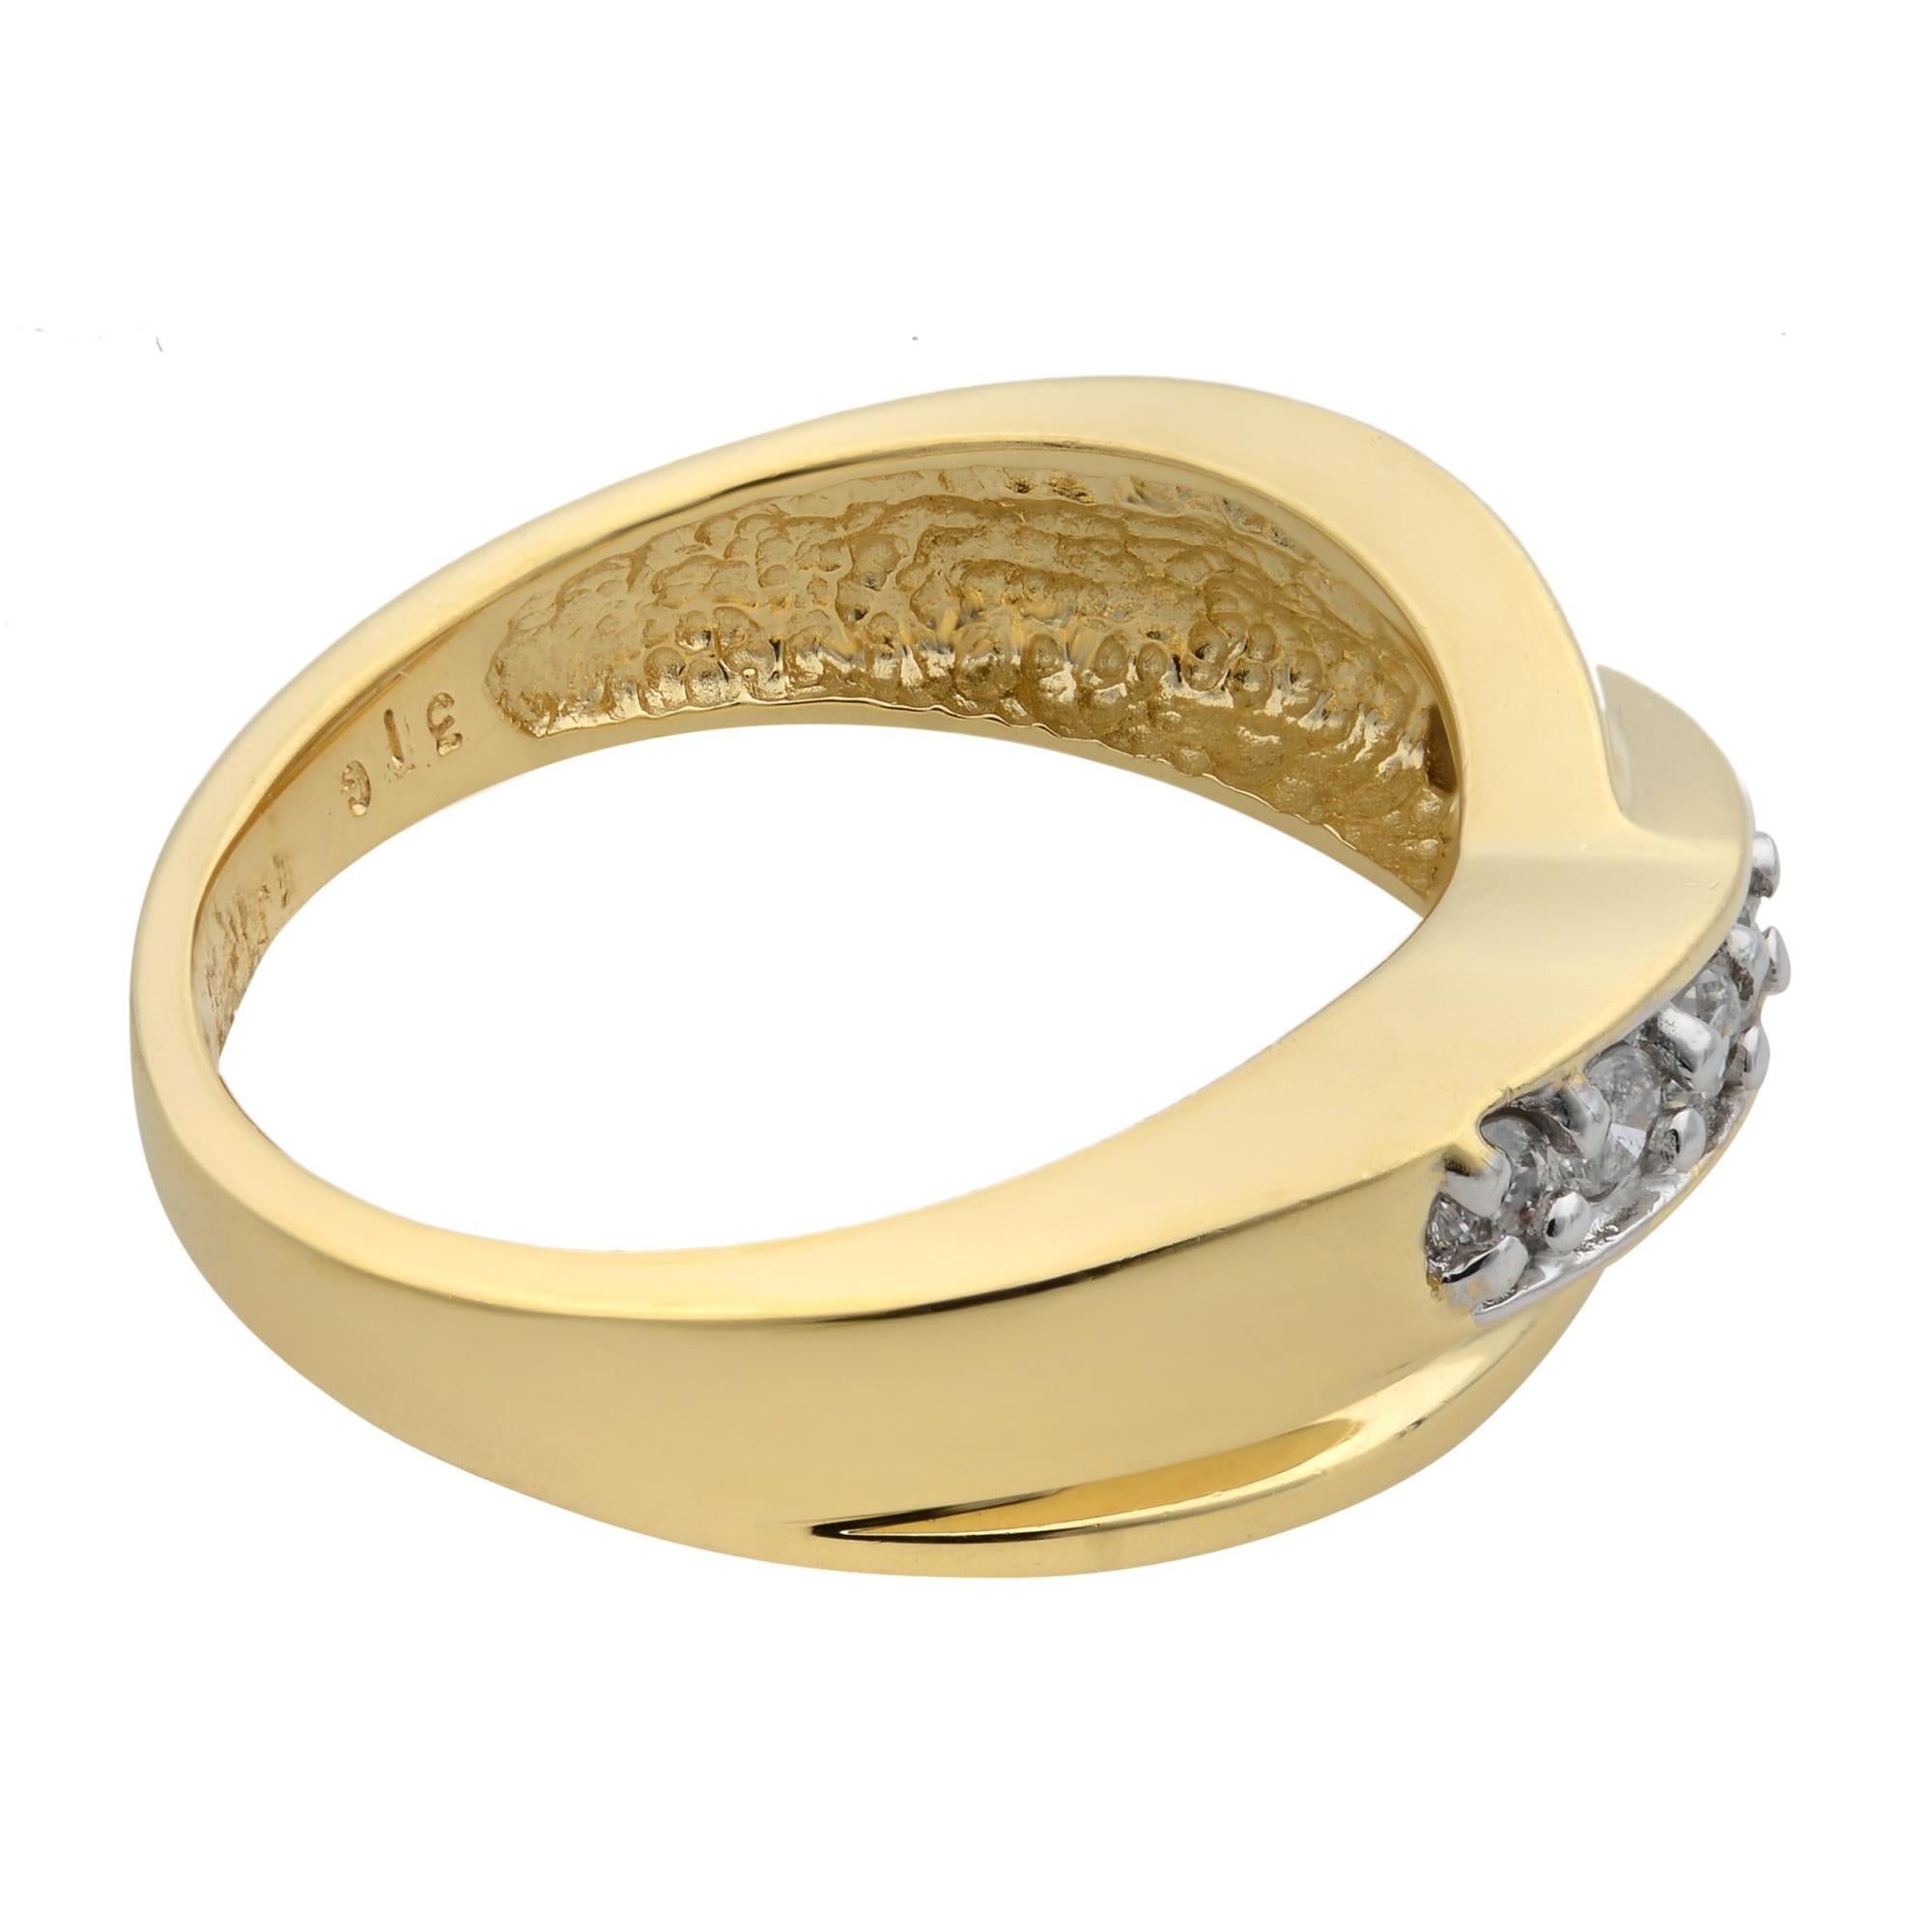 Rachel Koen 0.25cttw Diamond Ladies Band Ring 14K Yellow Gold In Excellent Condition For Sale In New York, NY